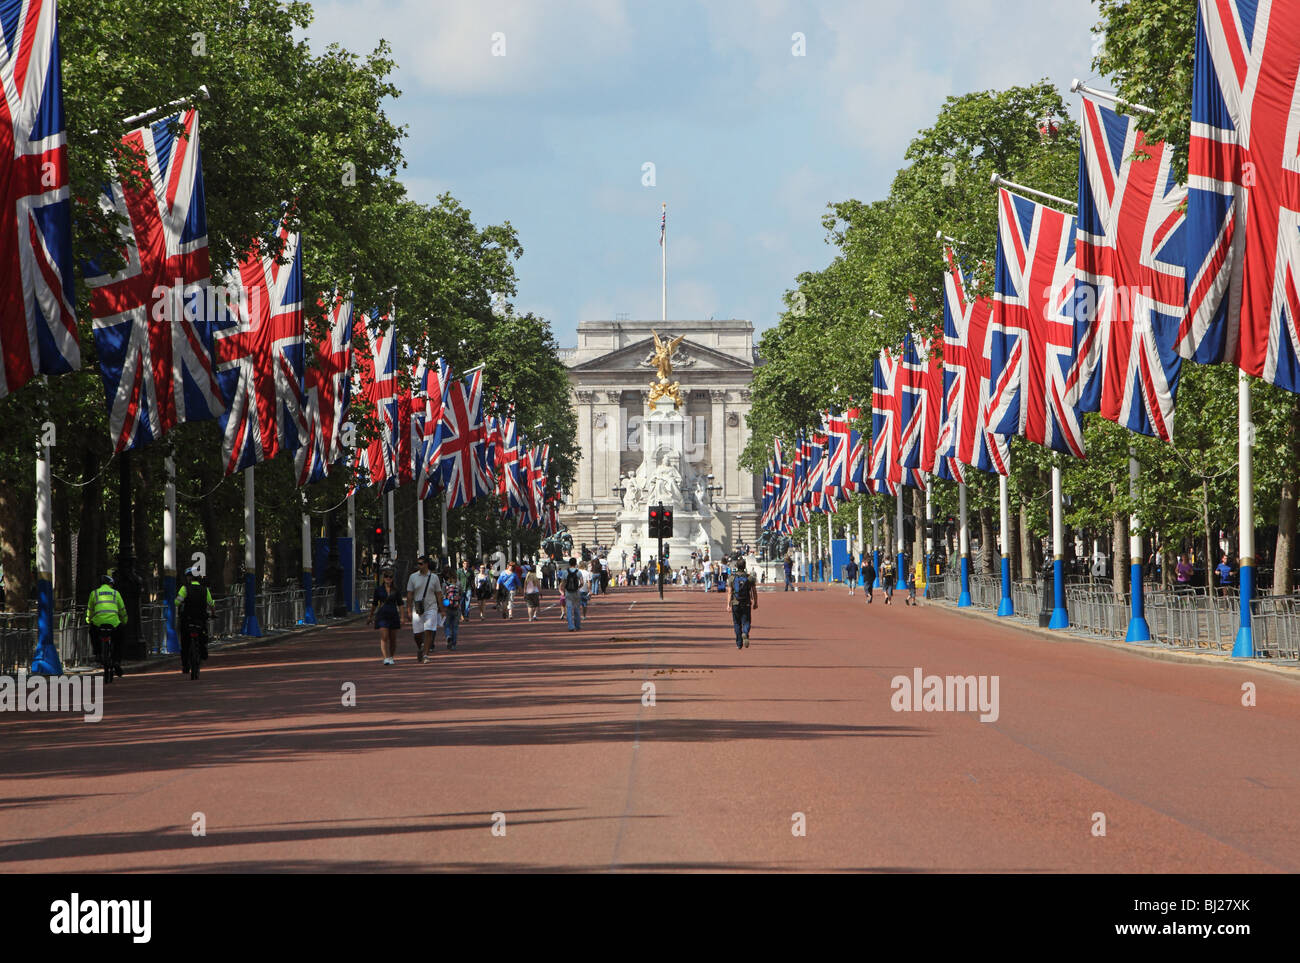 London, The Mall, Lined With Union Jack Flags, Buckingham Palace In The Background Stock Photo